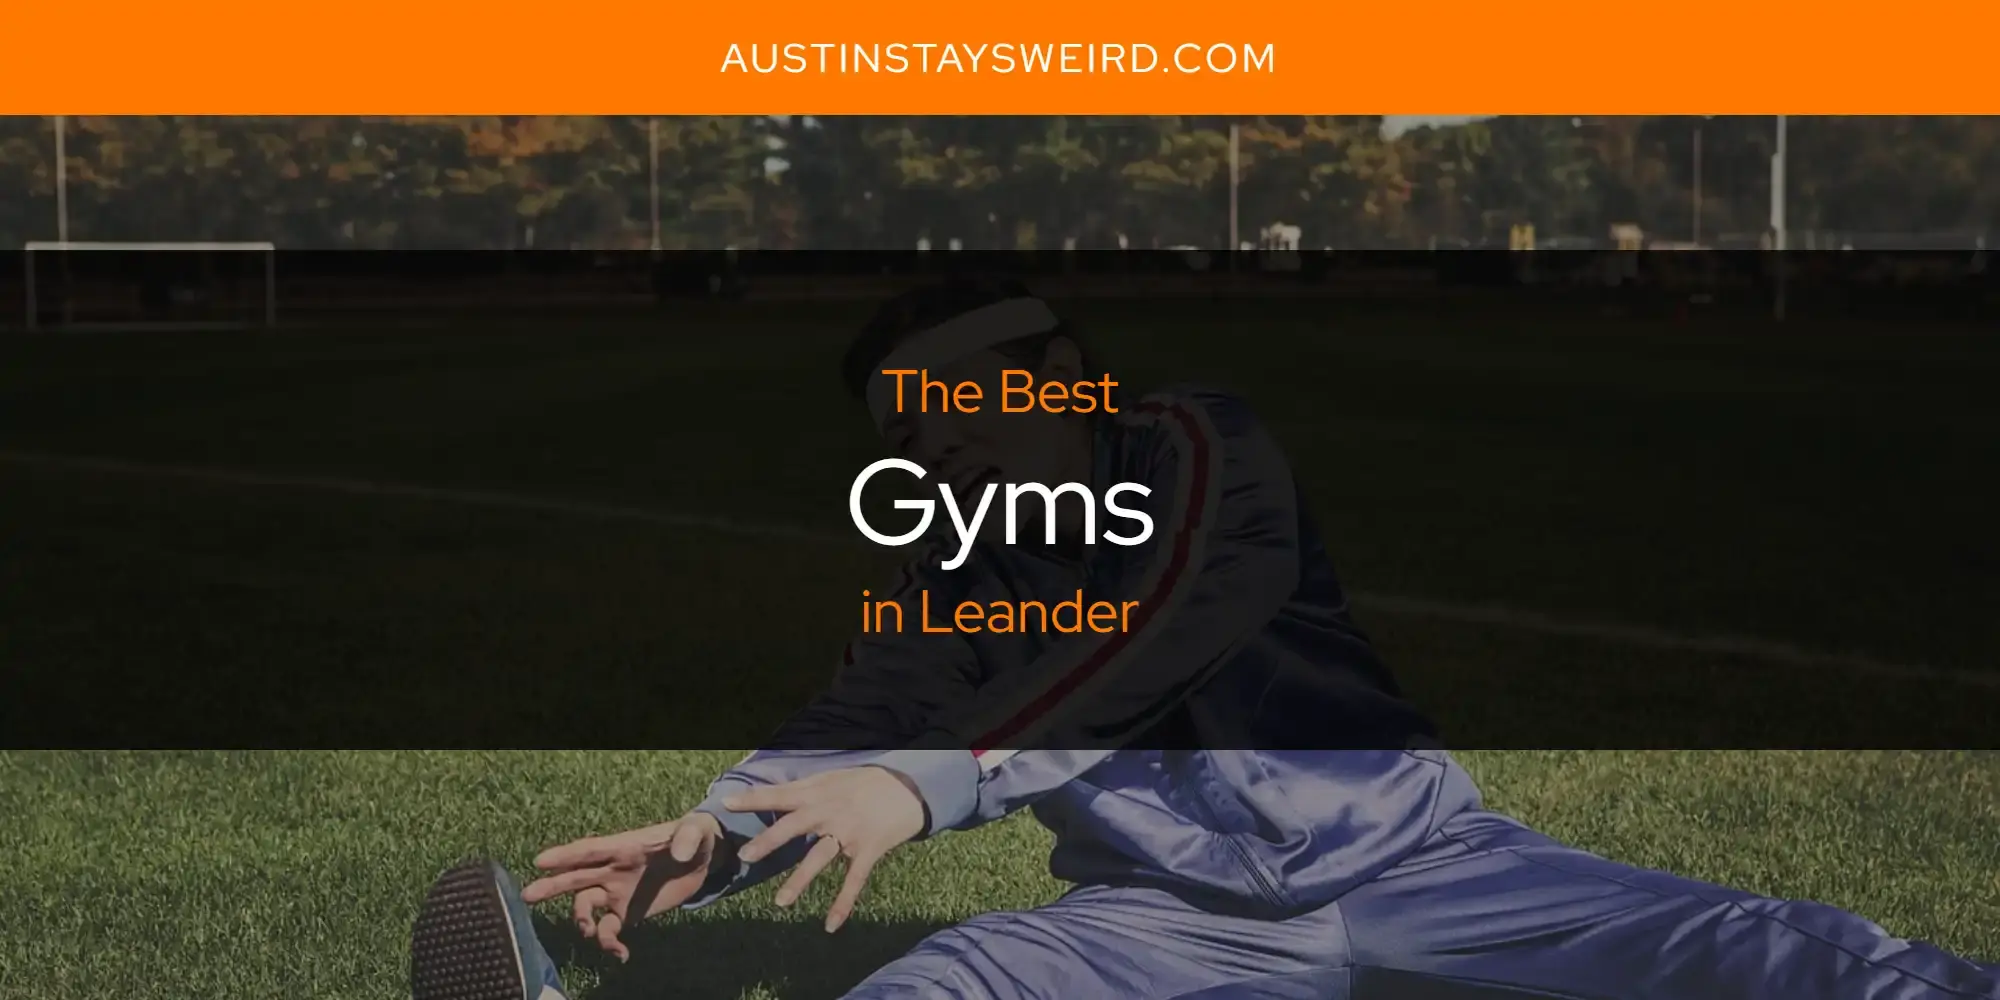 Best Gyms in Leander? Here's the Top 8